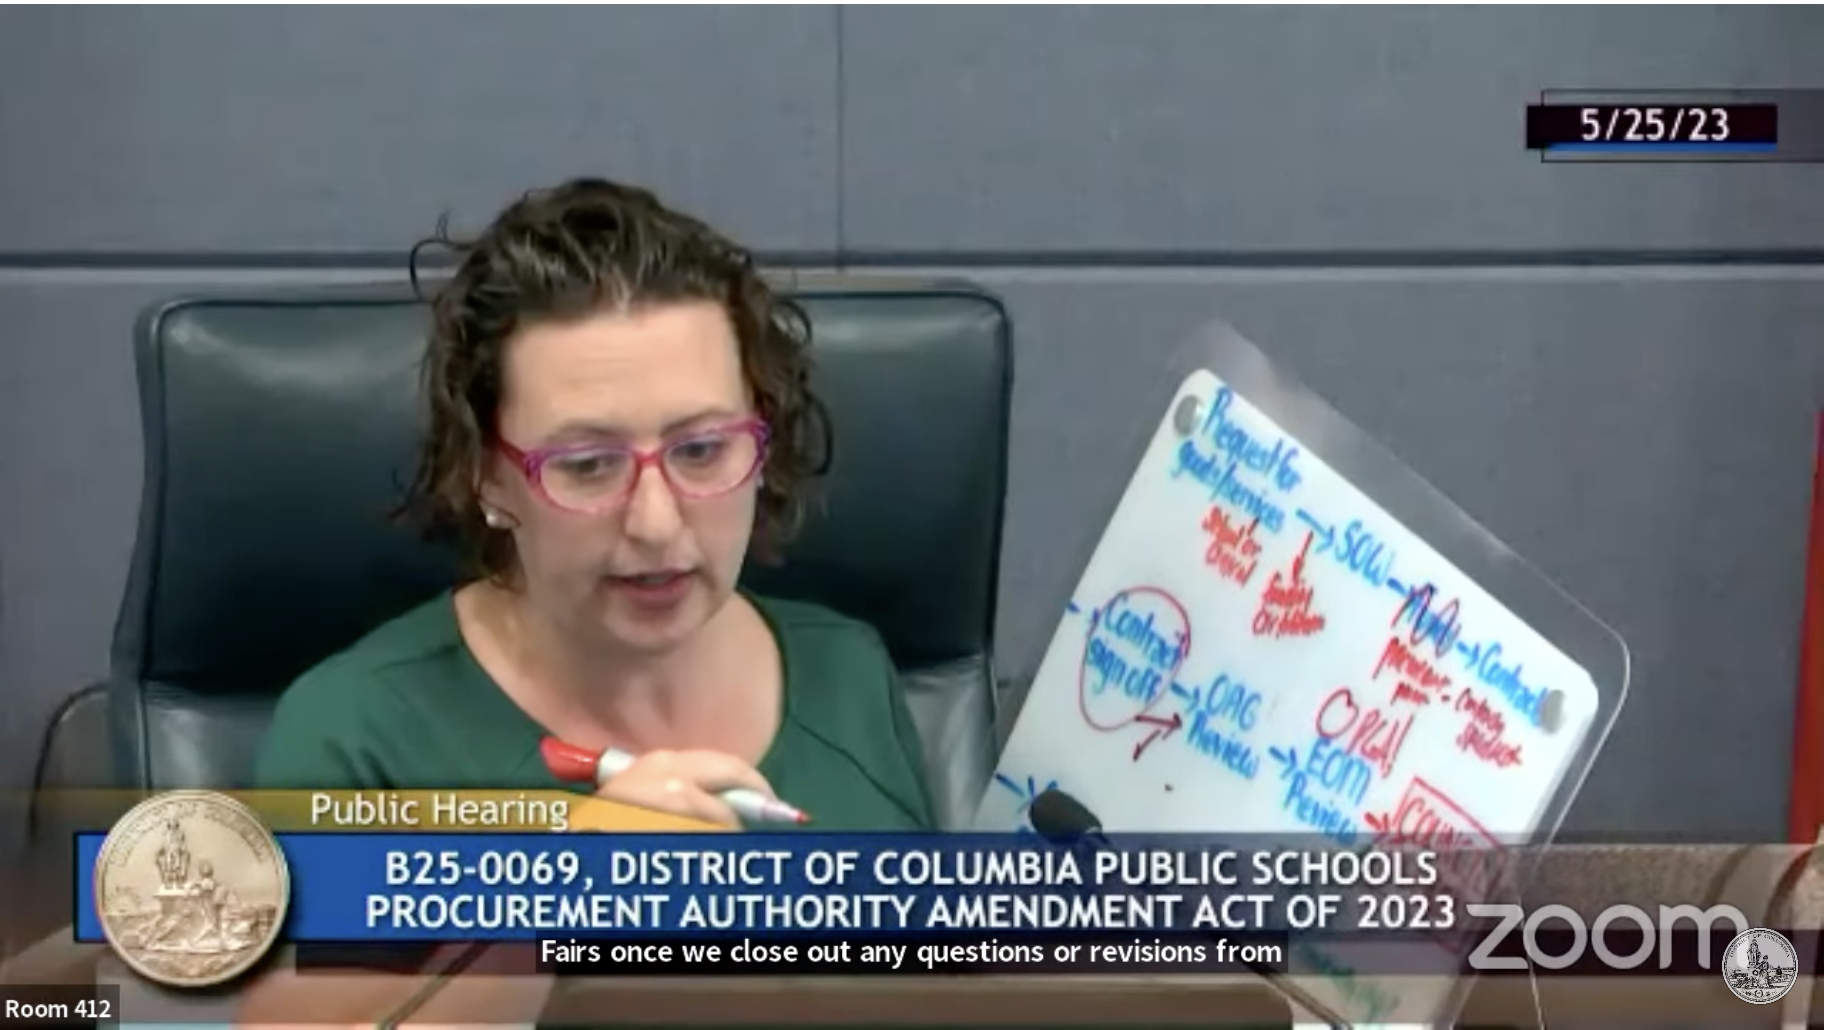 Councilmember Nadeau points to a white board with writing that shows the procurement process.